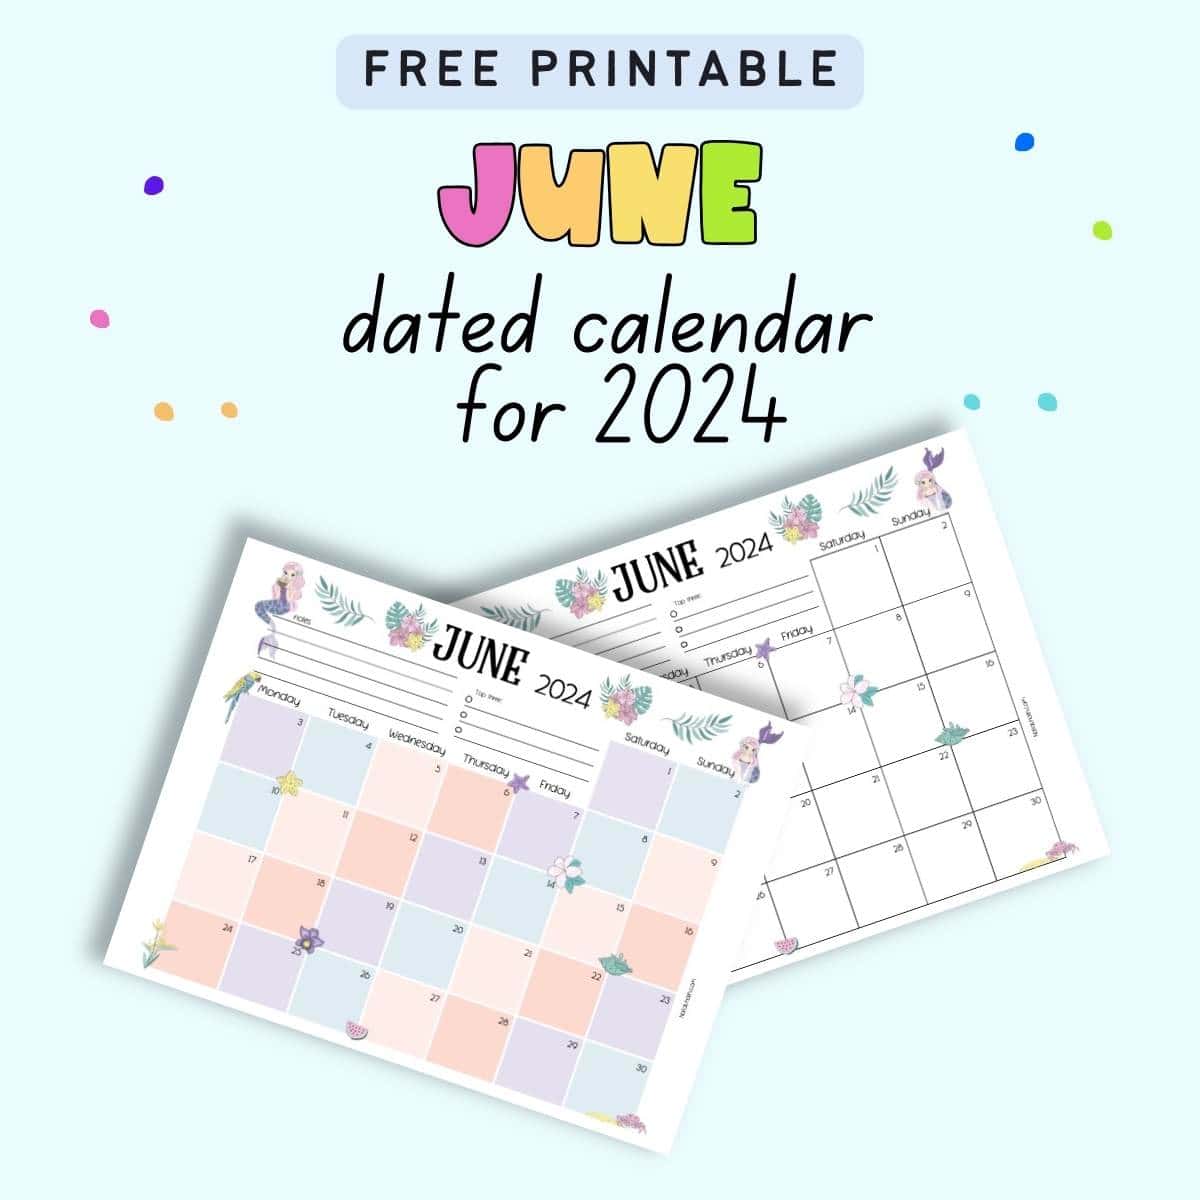 Text "free printable June dated calendar for 2024" with a preview of two pages of dated June 2024 calendar page with a tropical mermaid theme